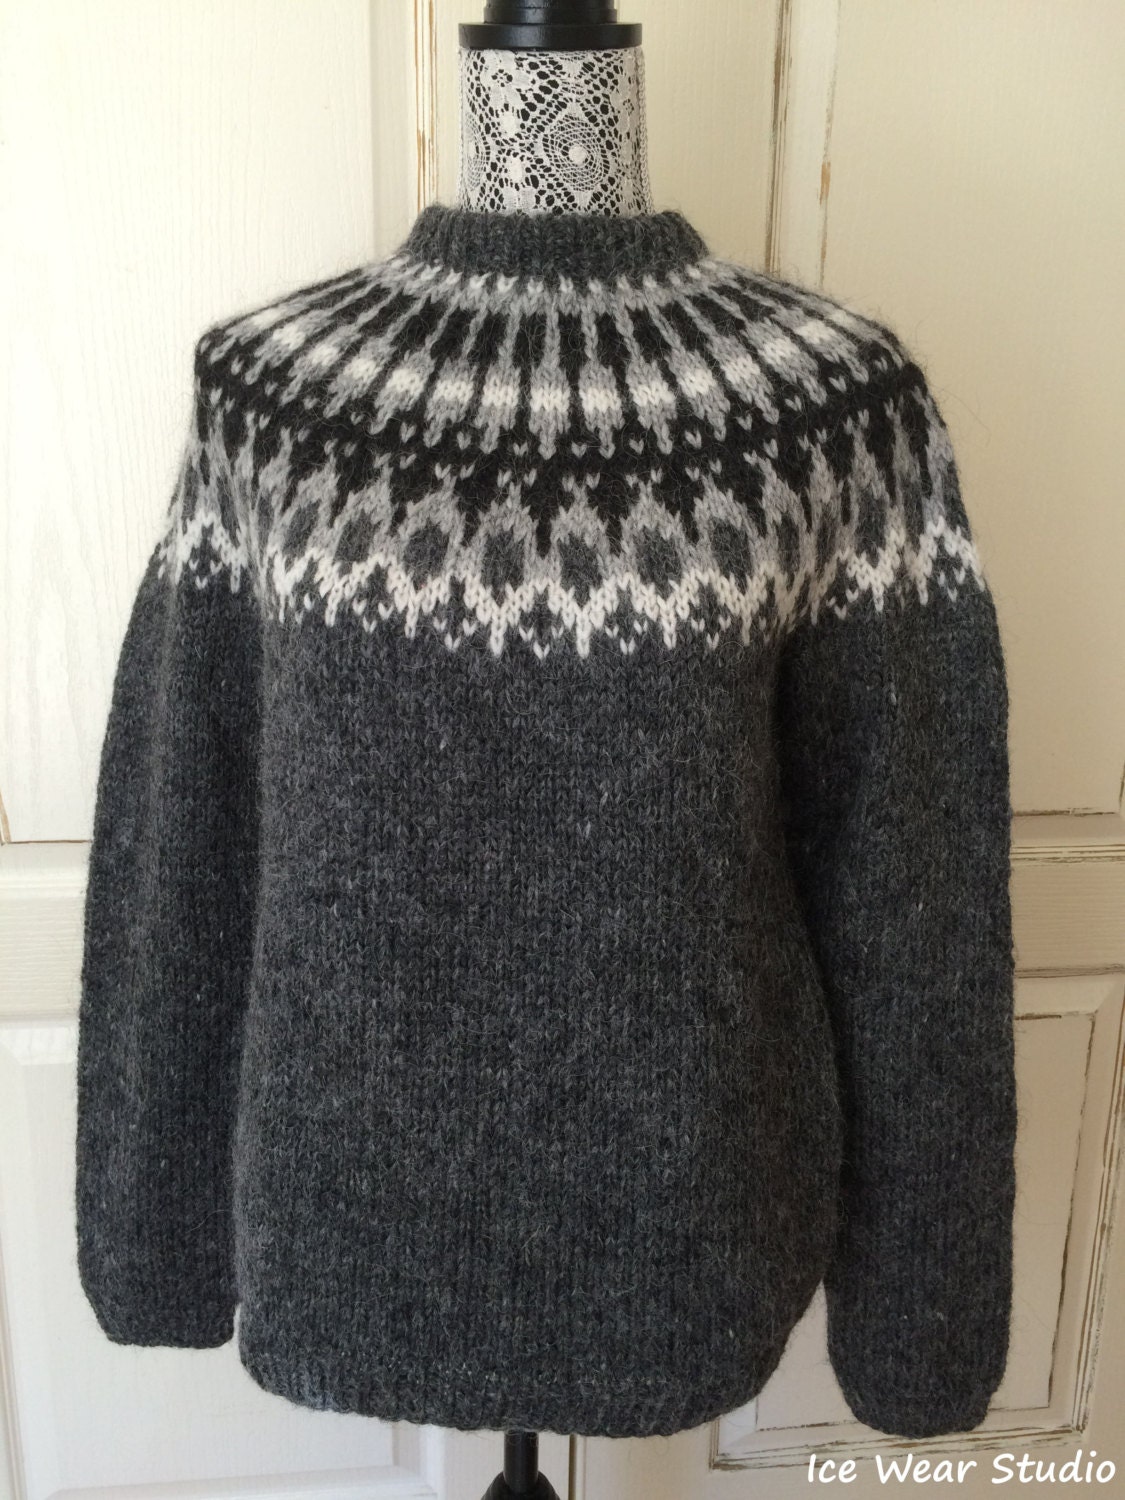 Icelandic Wool Sweater Hand Knitted With by IceWearStudio on Etsy